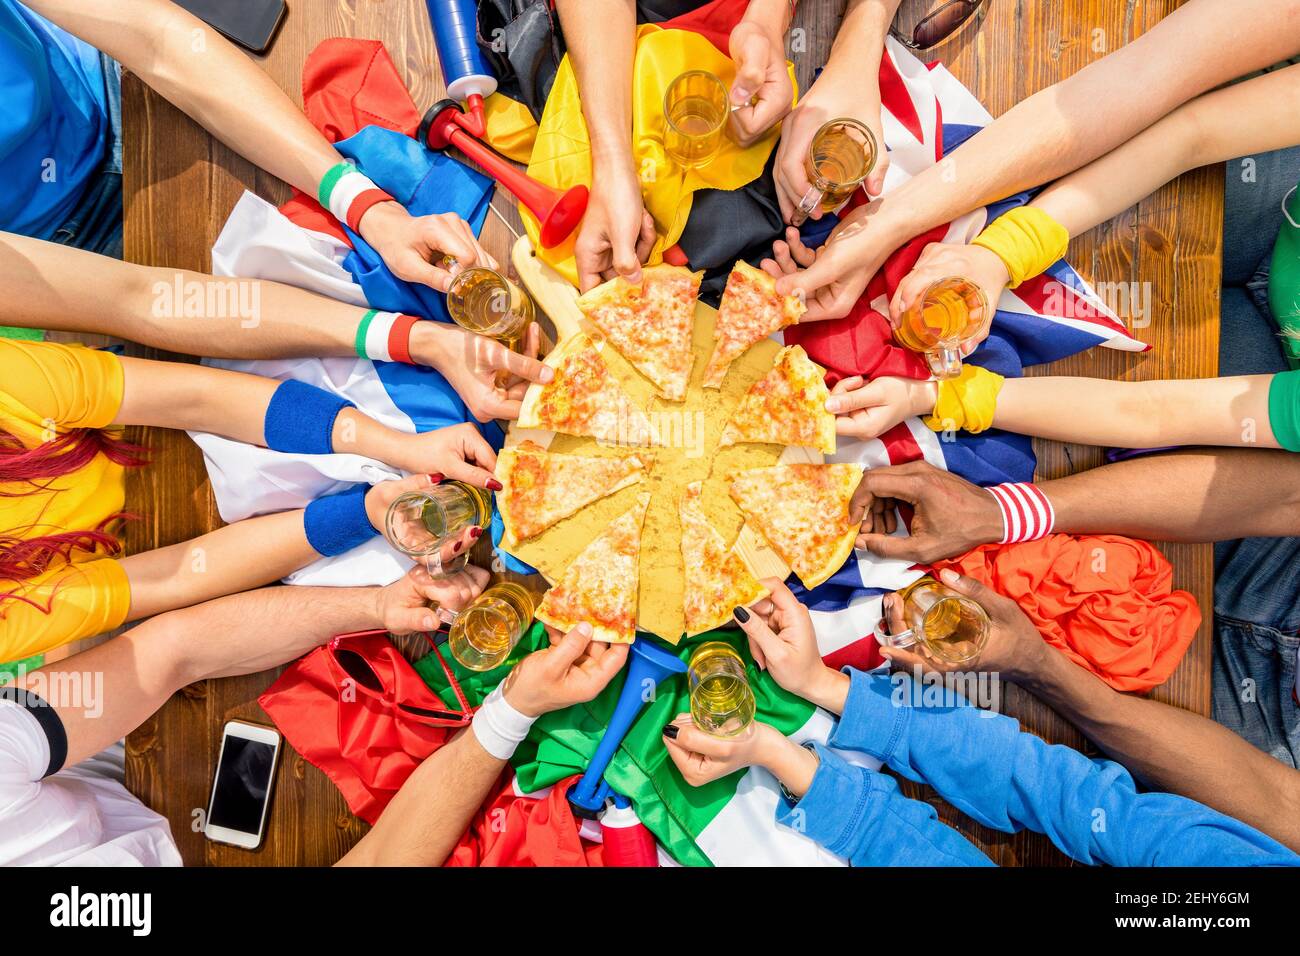 Top view of multiethnic hands of football sport supporter sharing pizza margherita - Friendship concept with soccer fans enjoying food together Stock Photo